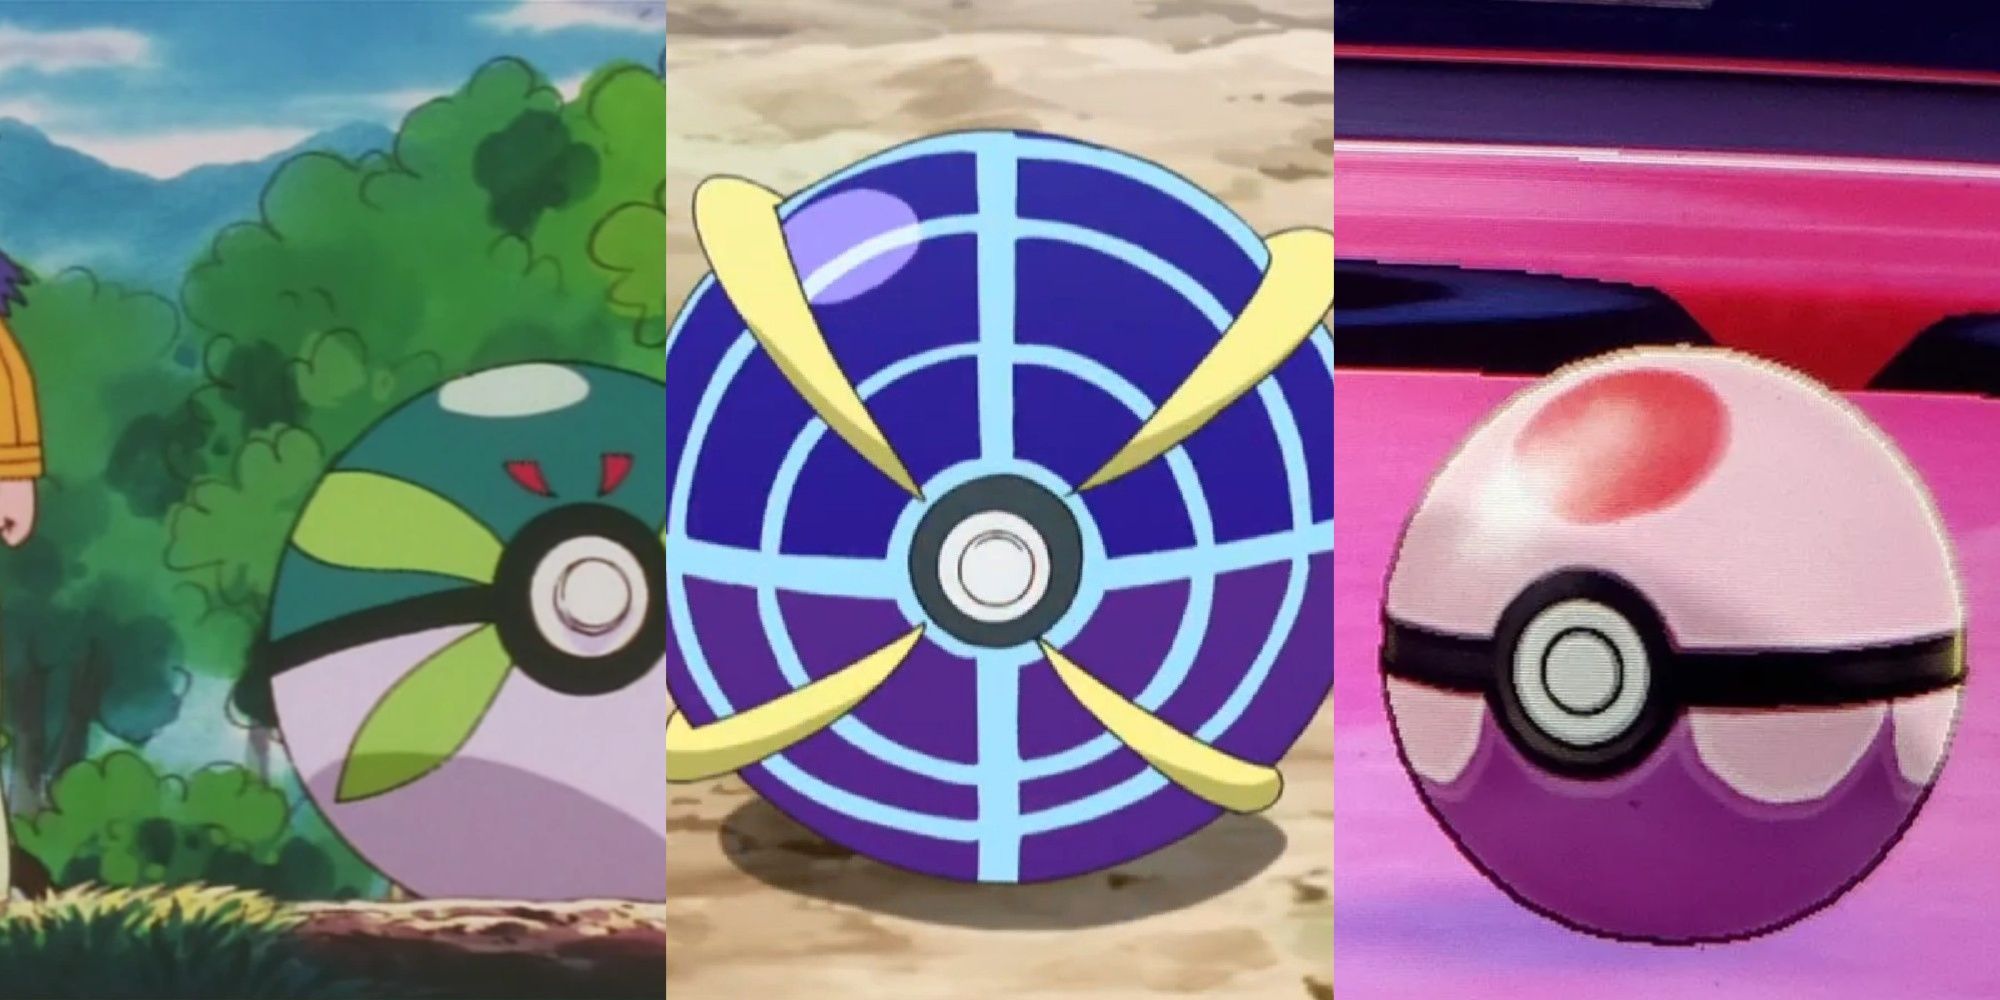 New Ultra Beasts and Beast Balls are coming to Pokémon GO Fest!